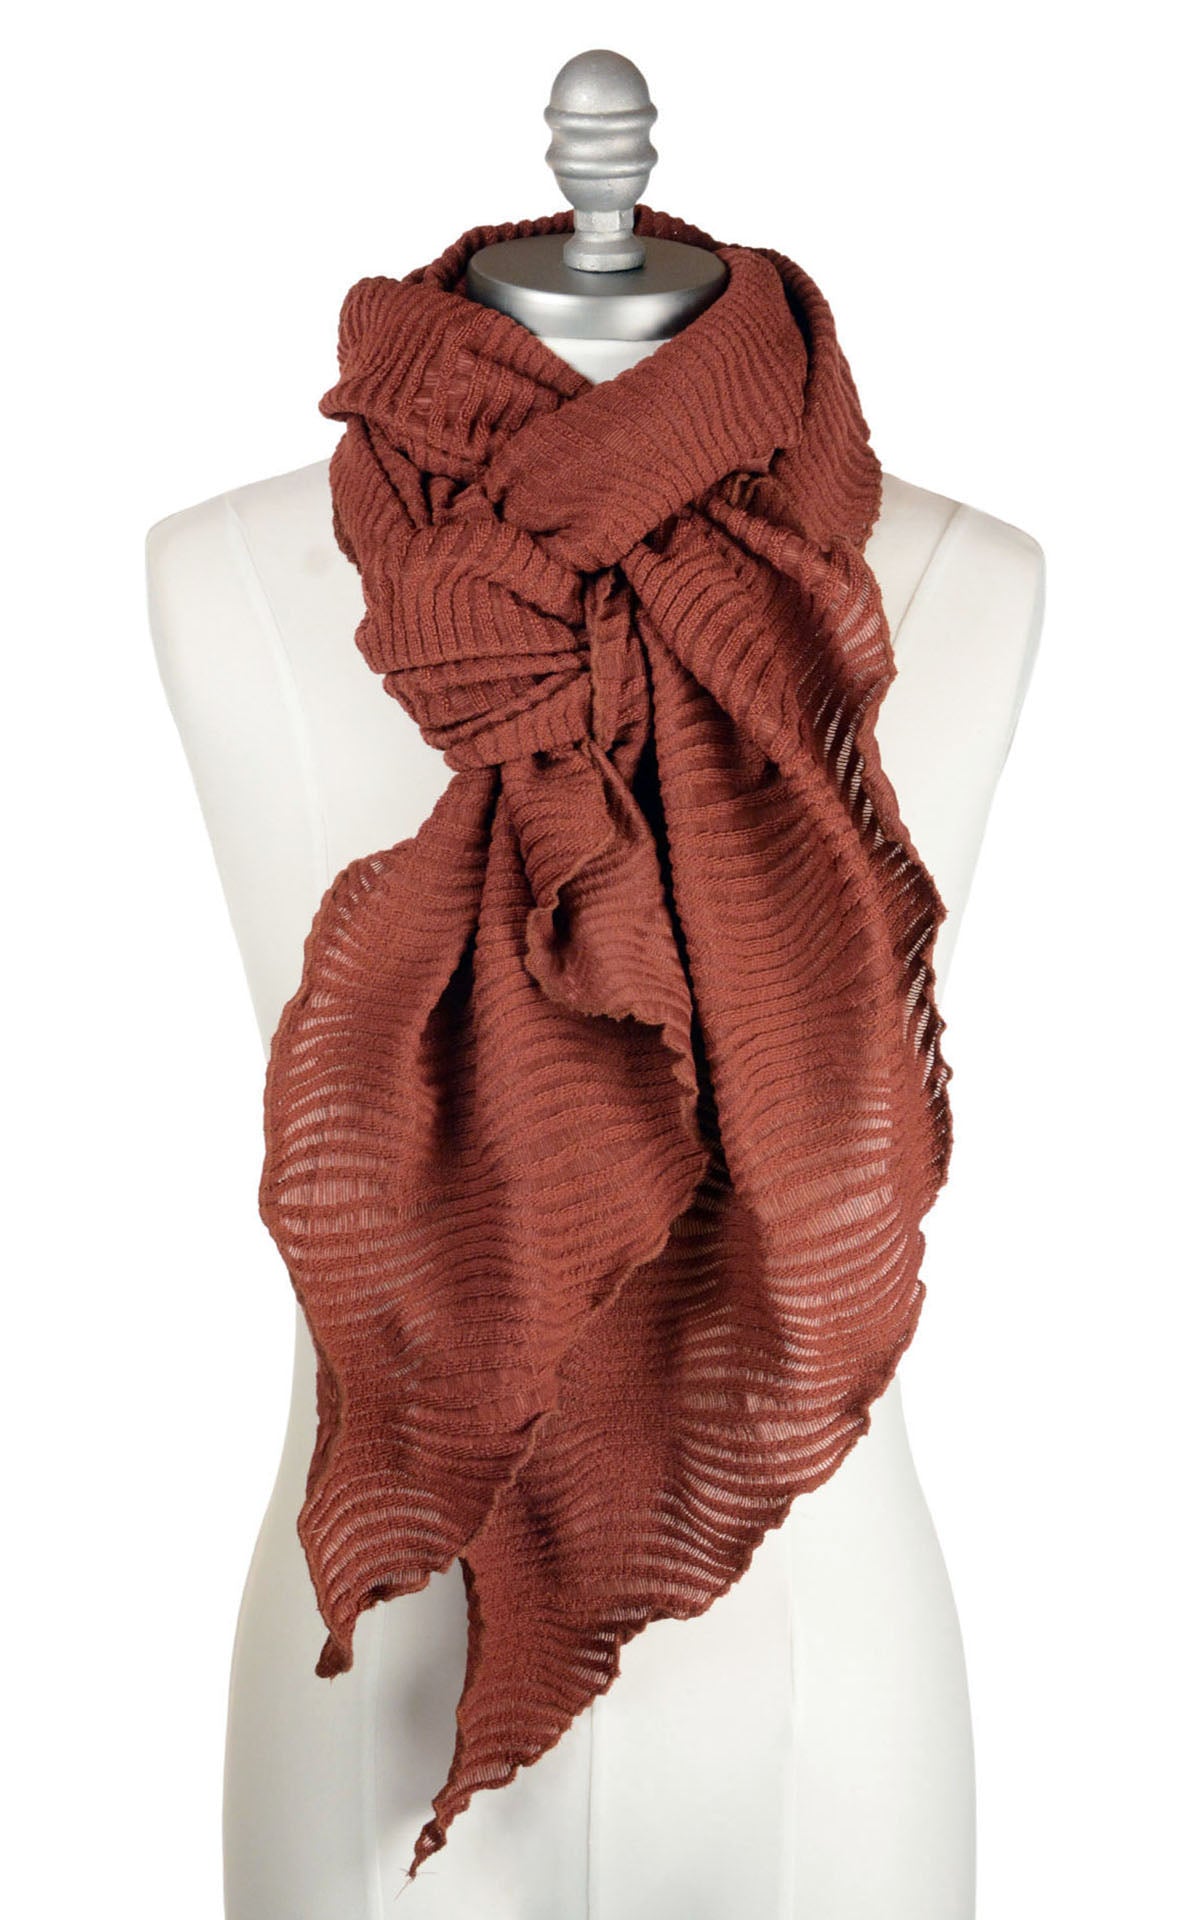 Fractal Handkerchief Scarf in Burnt Sienna, shown knotted and draped on product model. Handmade in Seattle, WA, USA. LYC/Pandemonium.